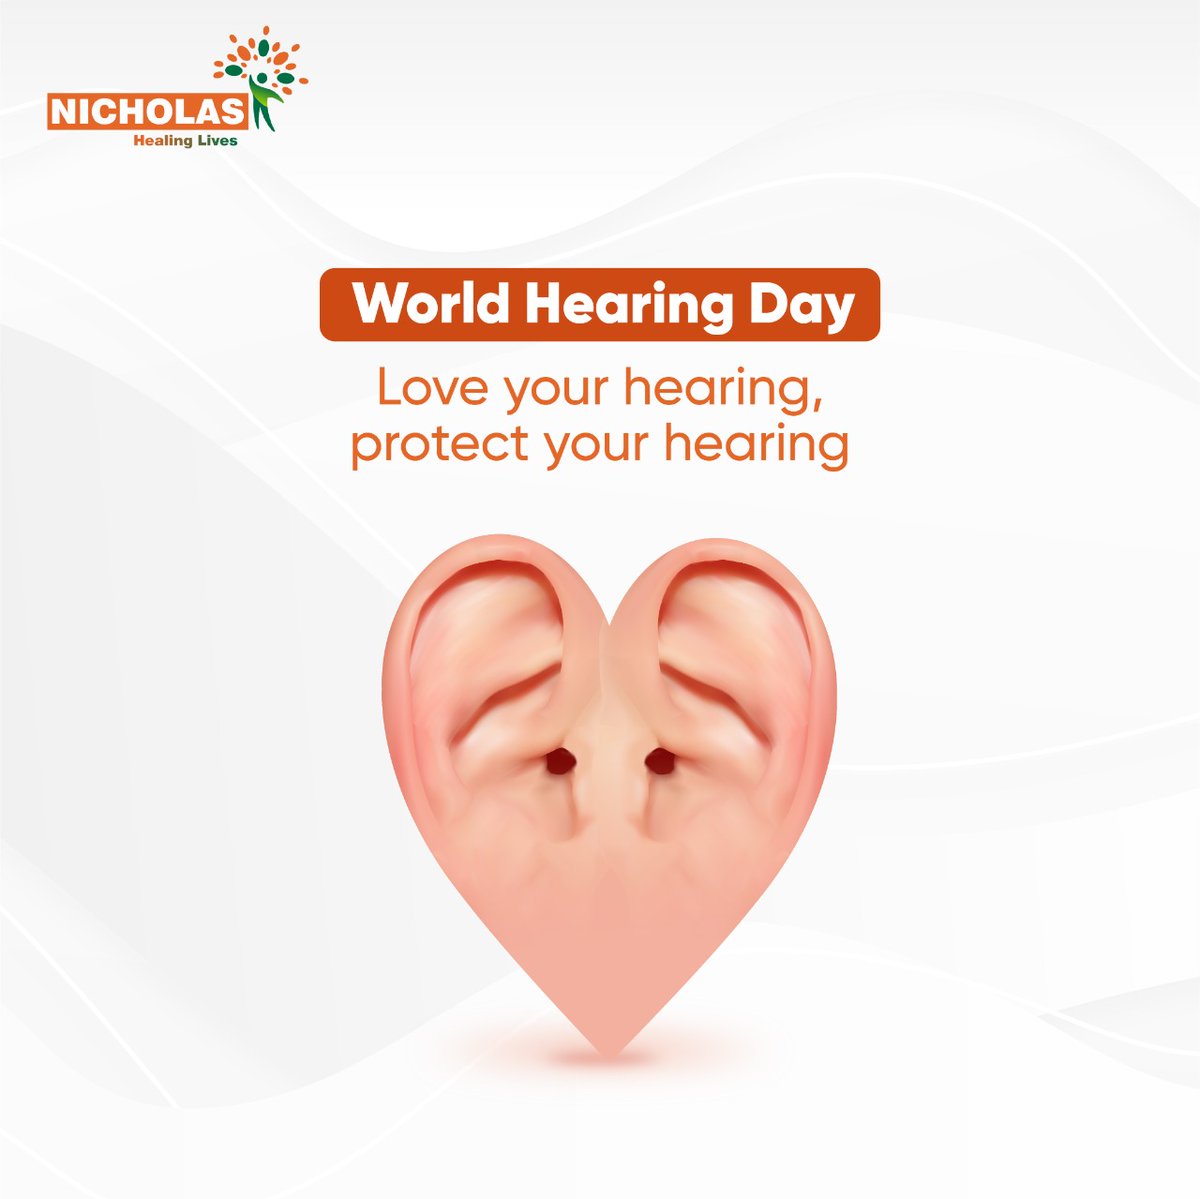 Those who cannot hear, are the ones who know the importance of hearing, this day reminds us all to love & take care of our hearing abilities. Wishing you all Happy World Hearing Day.
#worldhearingday
.
.
#nicholashealthcare #hearingday #healthyhearing #nicholashealth #healthyfood